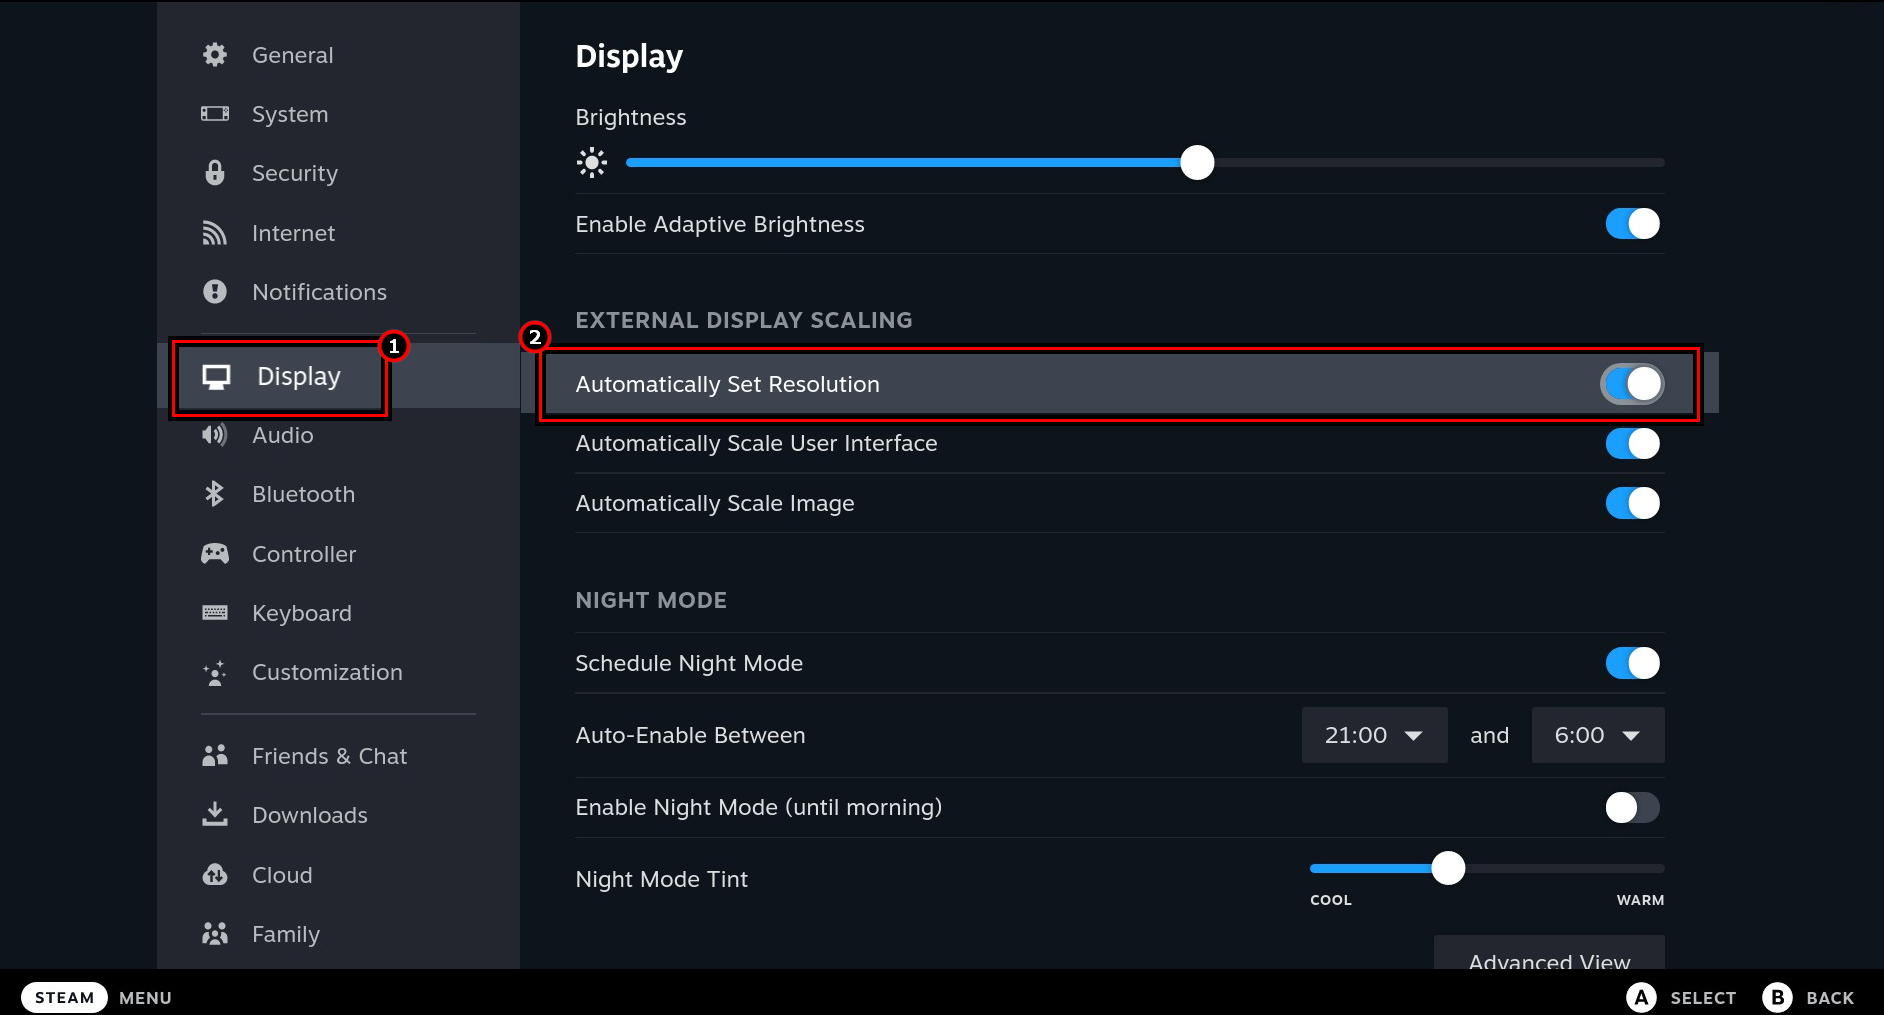 Enable Automatically Set Resolution in the Disaply Settings of the Steam Deck